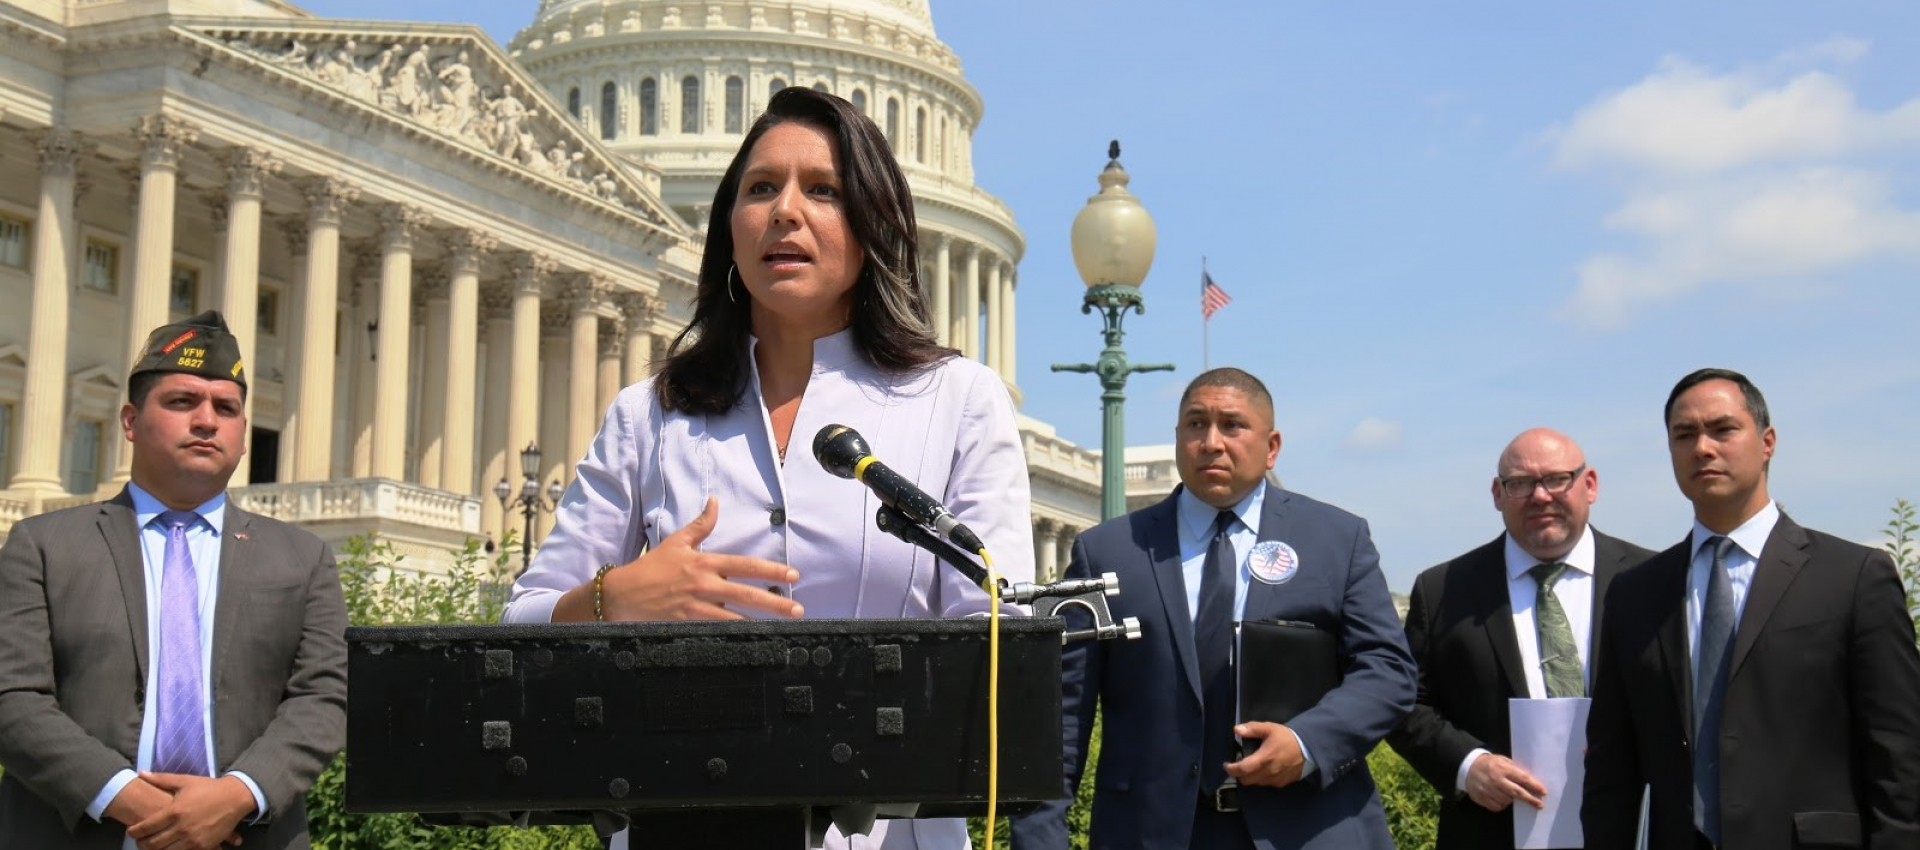 Jun. 7, 2018: Rep. Tulsi Gabbard Speaks at a Press Conference Urging Congress to Pass Legislation to Support Veterans Exposed to Toxic Burn Pits